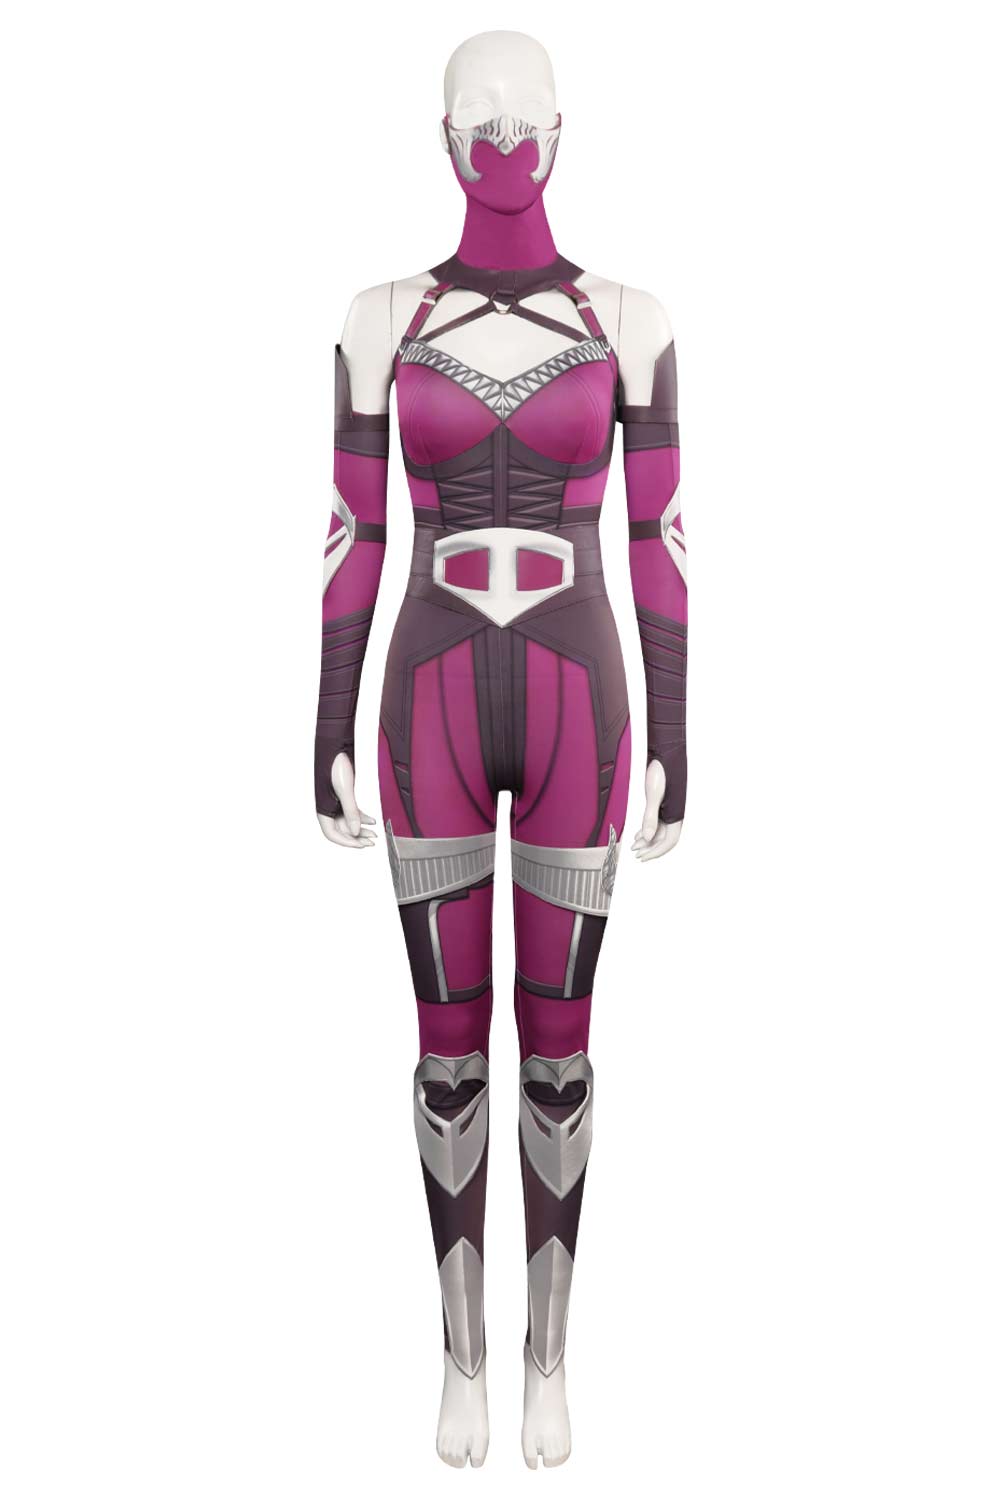 Game Mortal Kombat 1 Milenna Outfits Halloween Carnival Suit Cosplay Costume